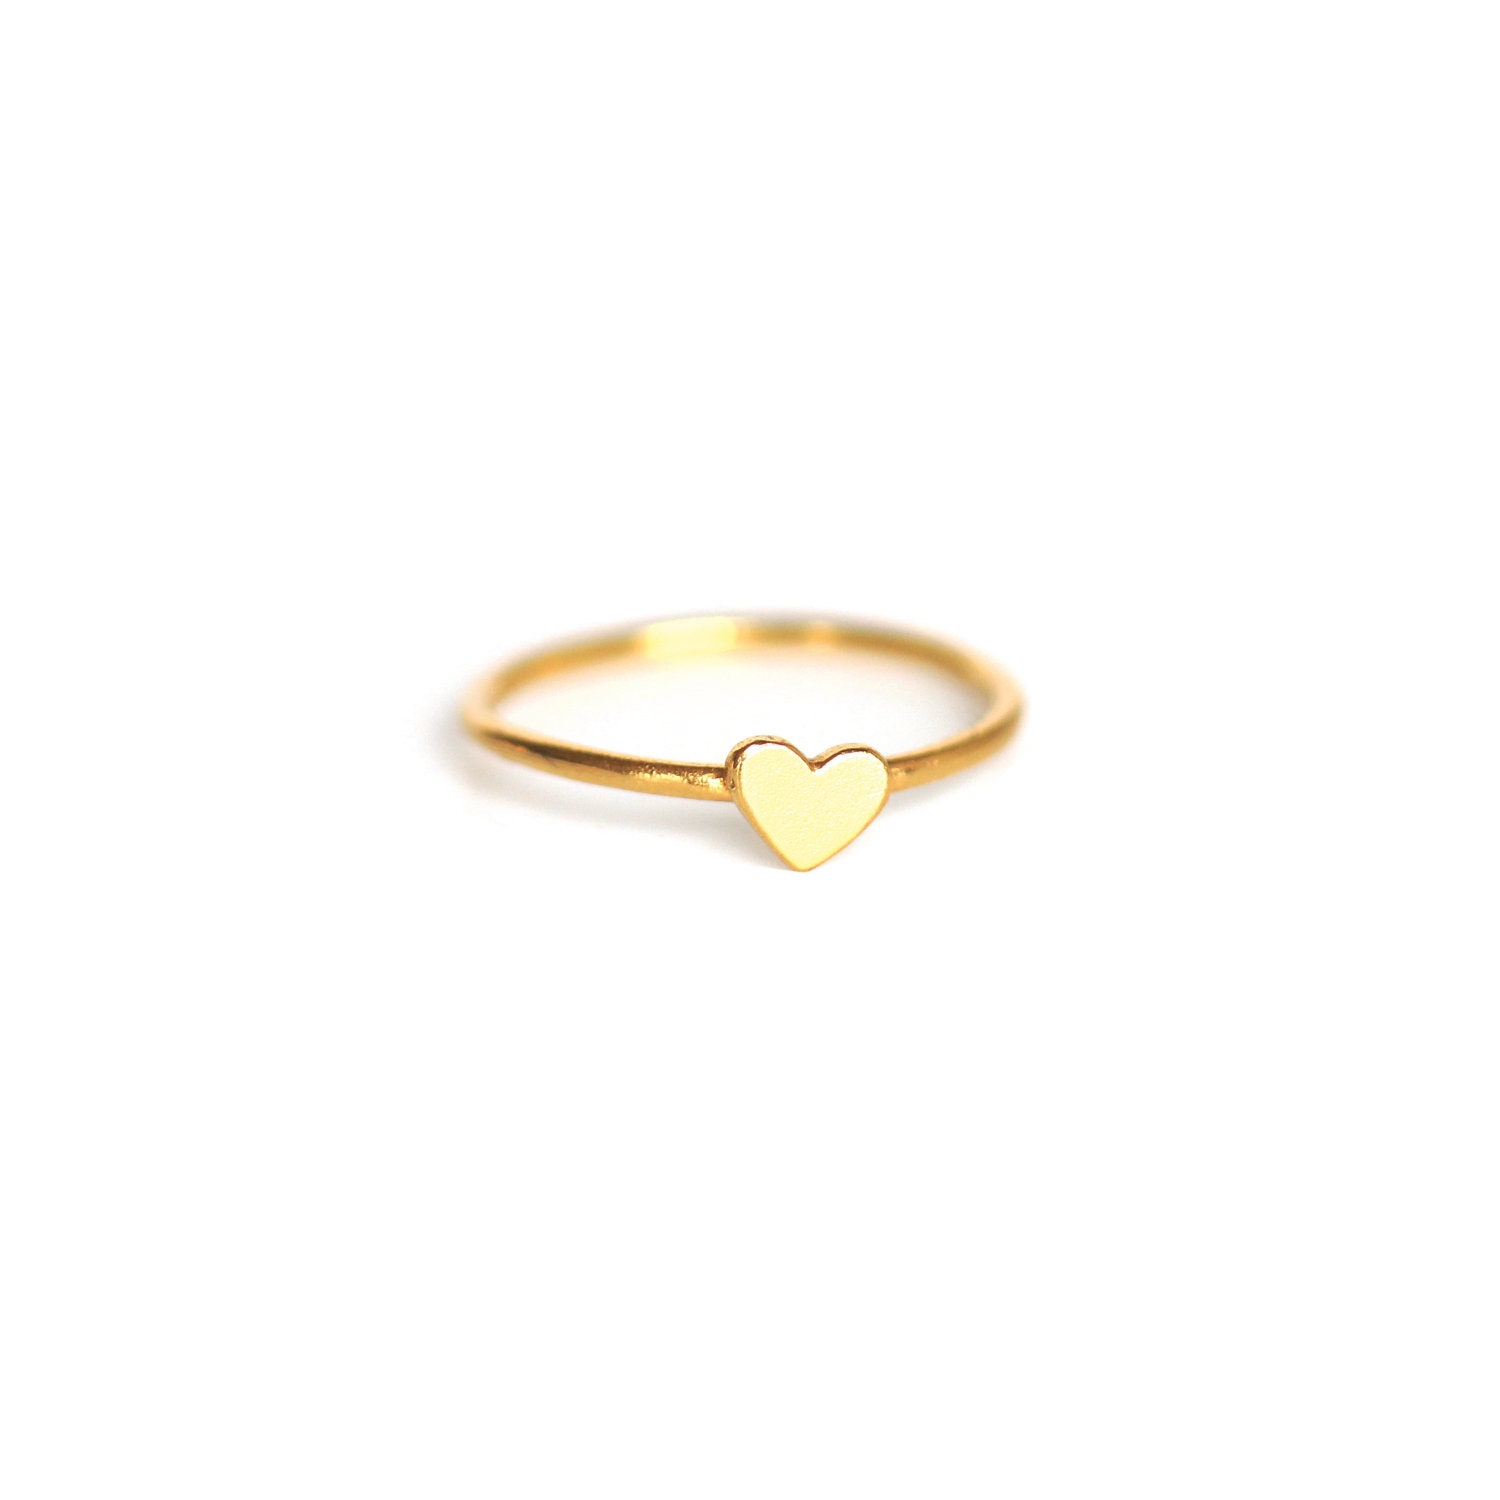 A Tiny Delicate Heart Ring Hand Carved in 18k Gold by xChupi